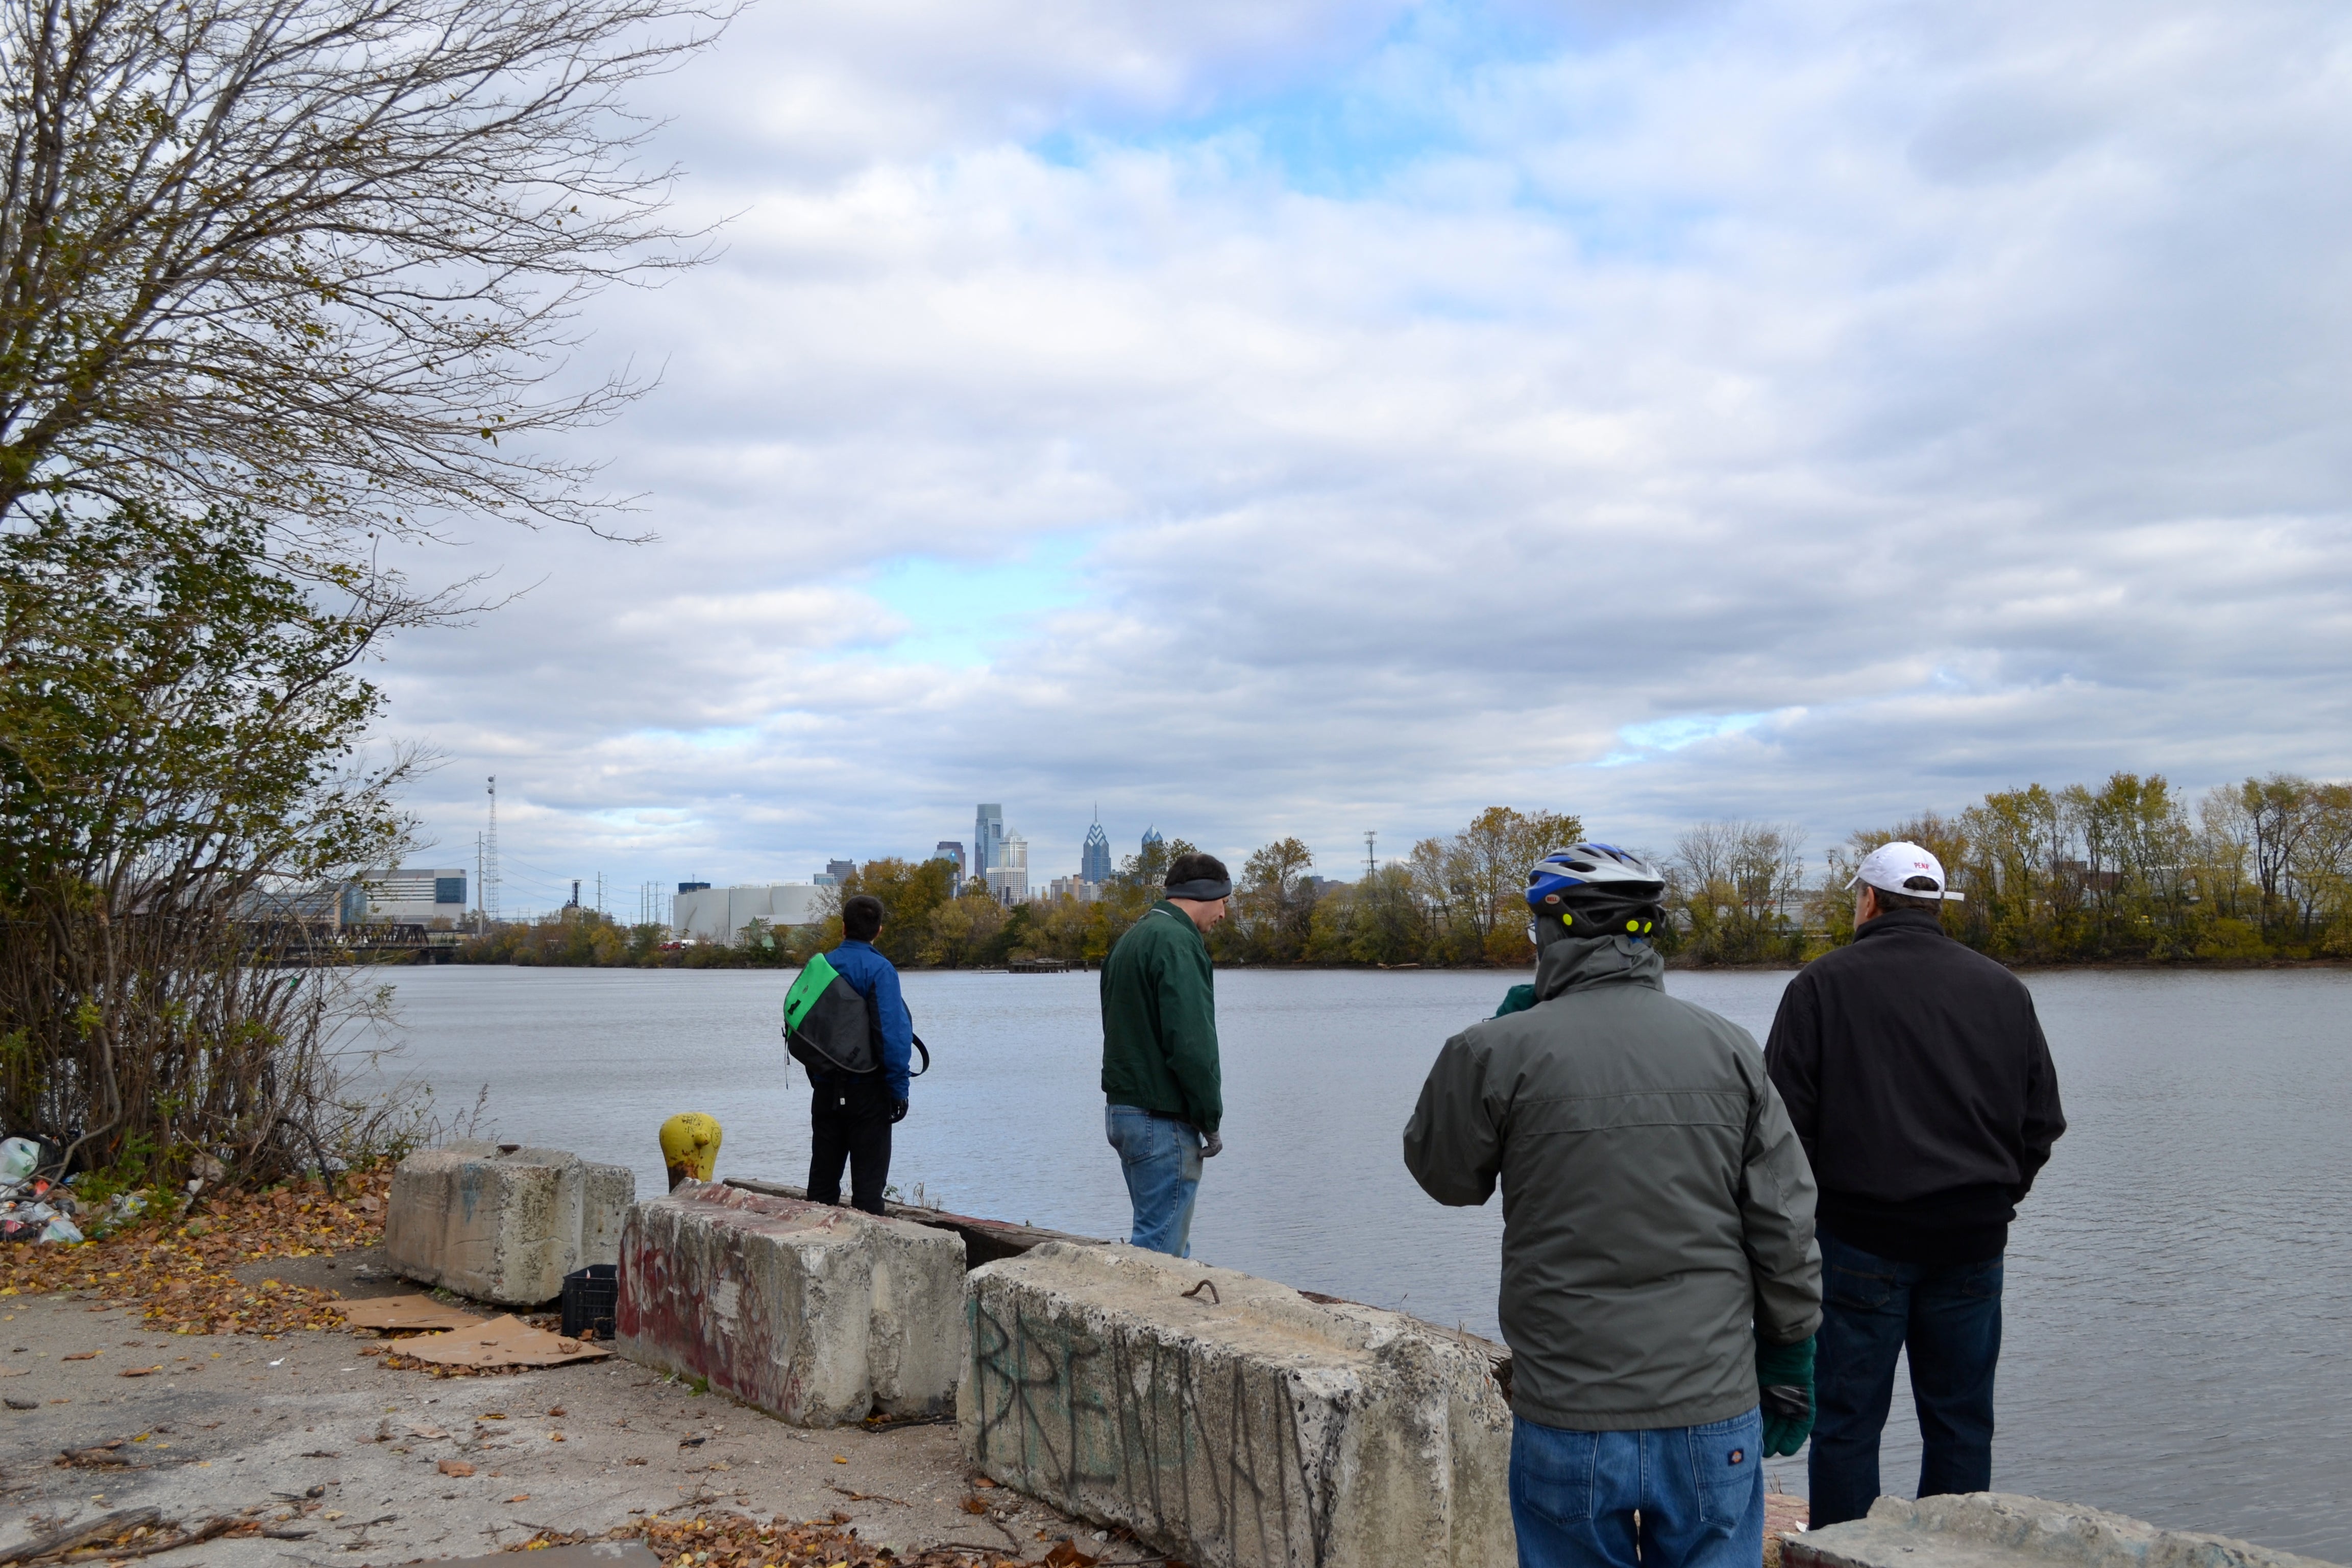 Tour attendees viewed the Center City skyline from the southern half of Bartram's Mile